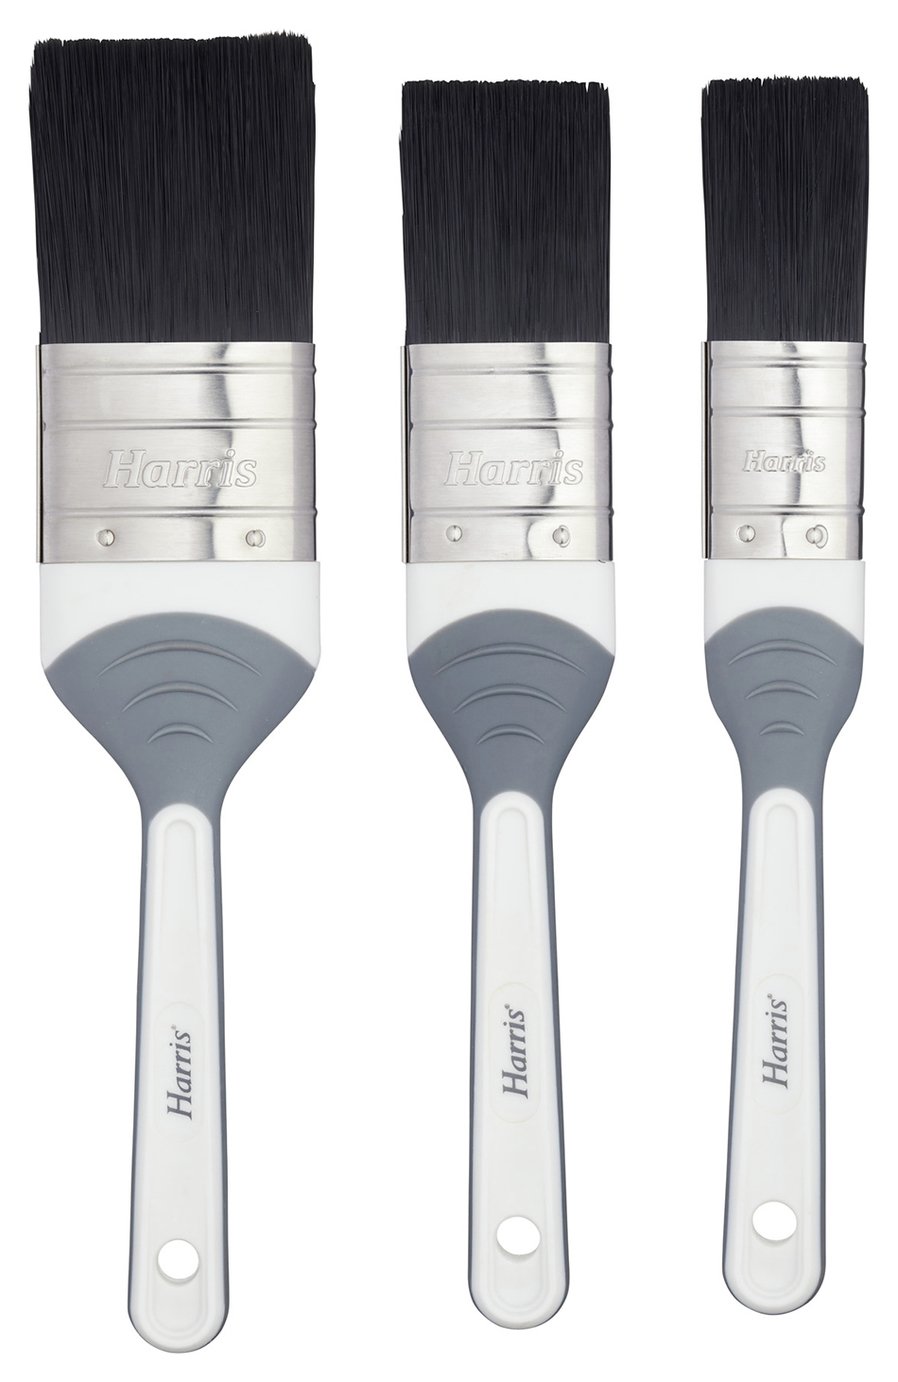 Harris Seriously Good Woodwork Gloss Paint Brush - Pack of 3